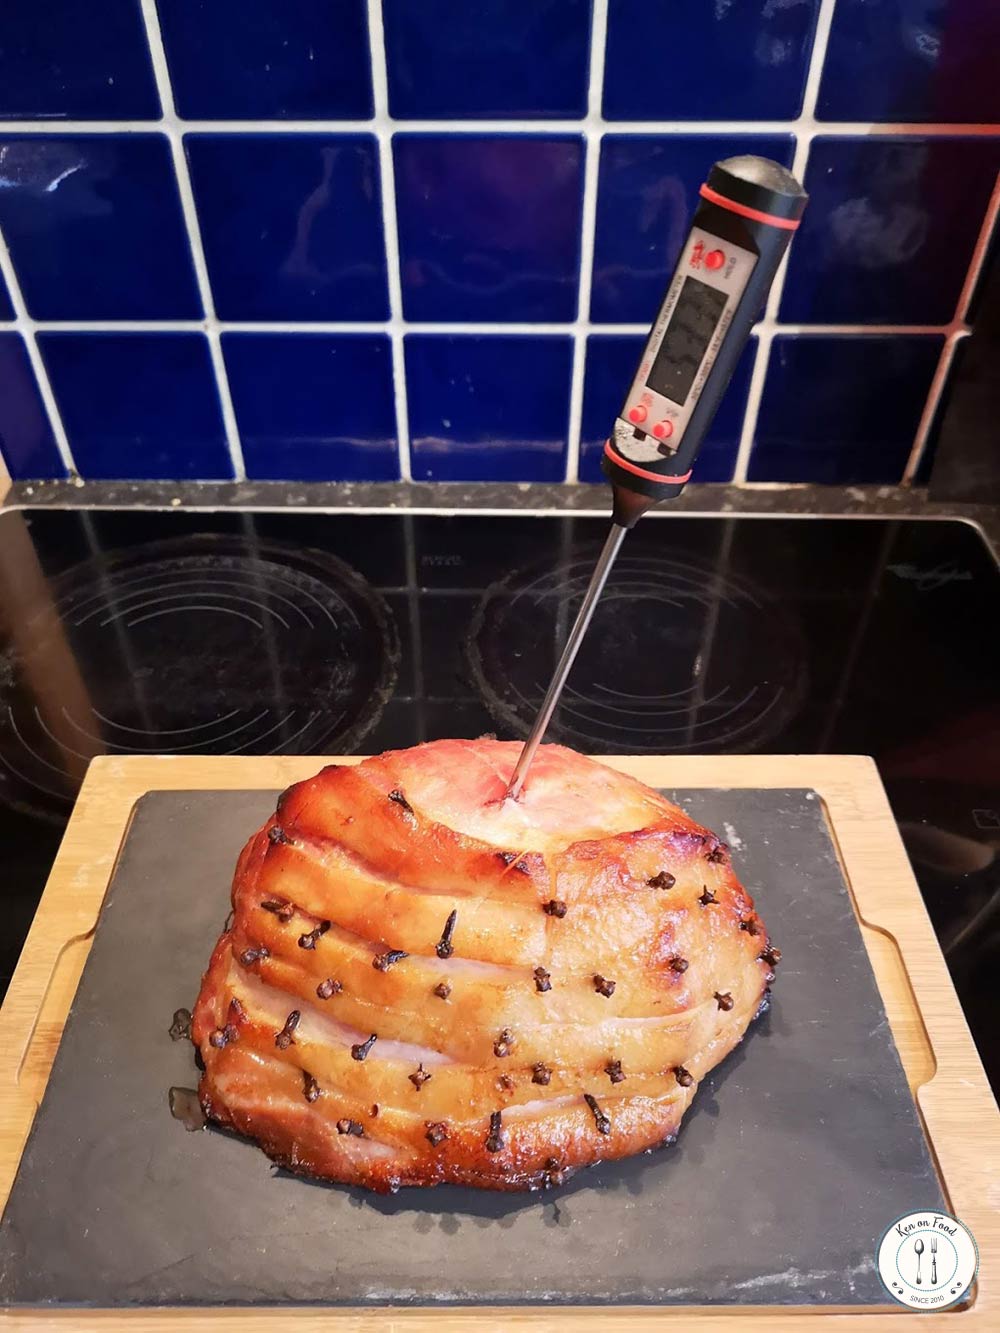 Temperature checking a roast ham from the oven.